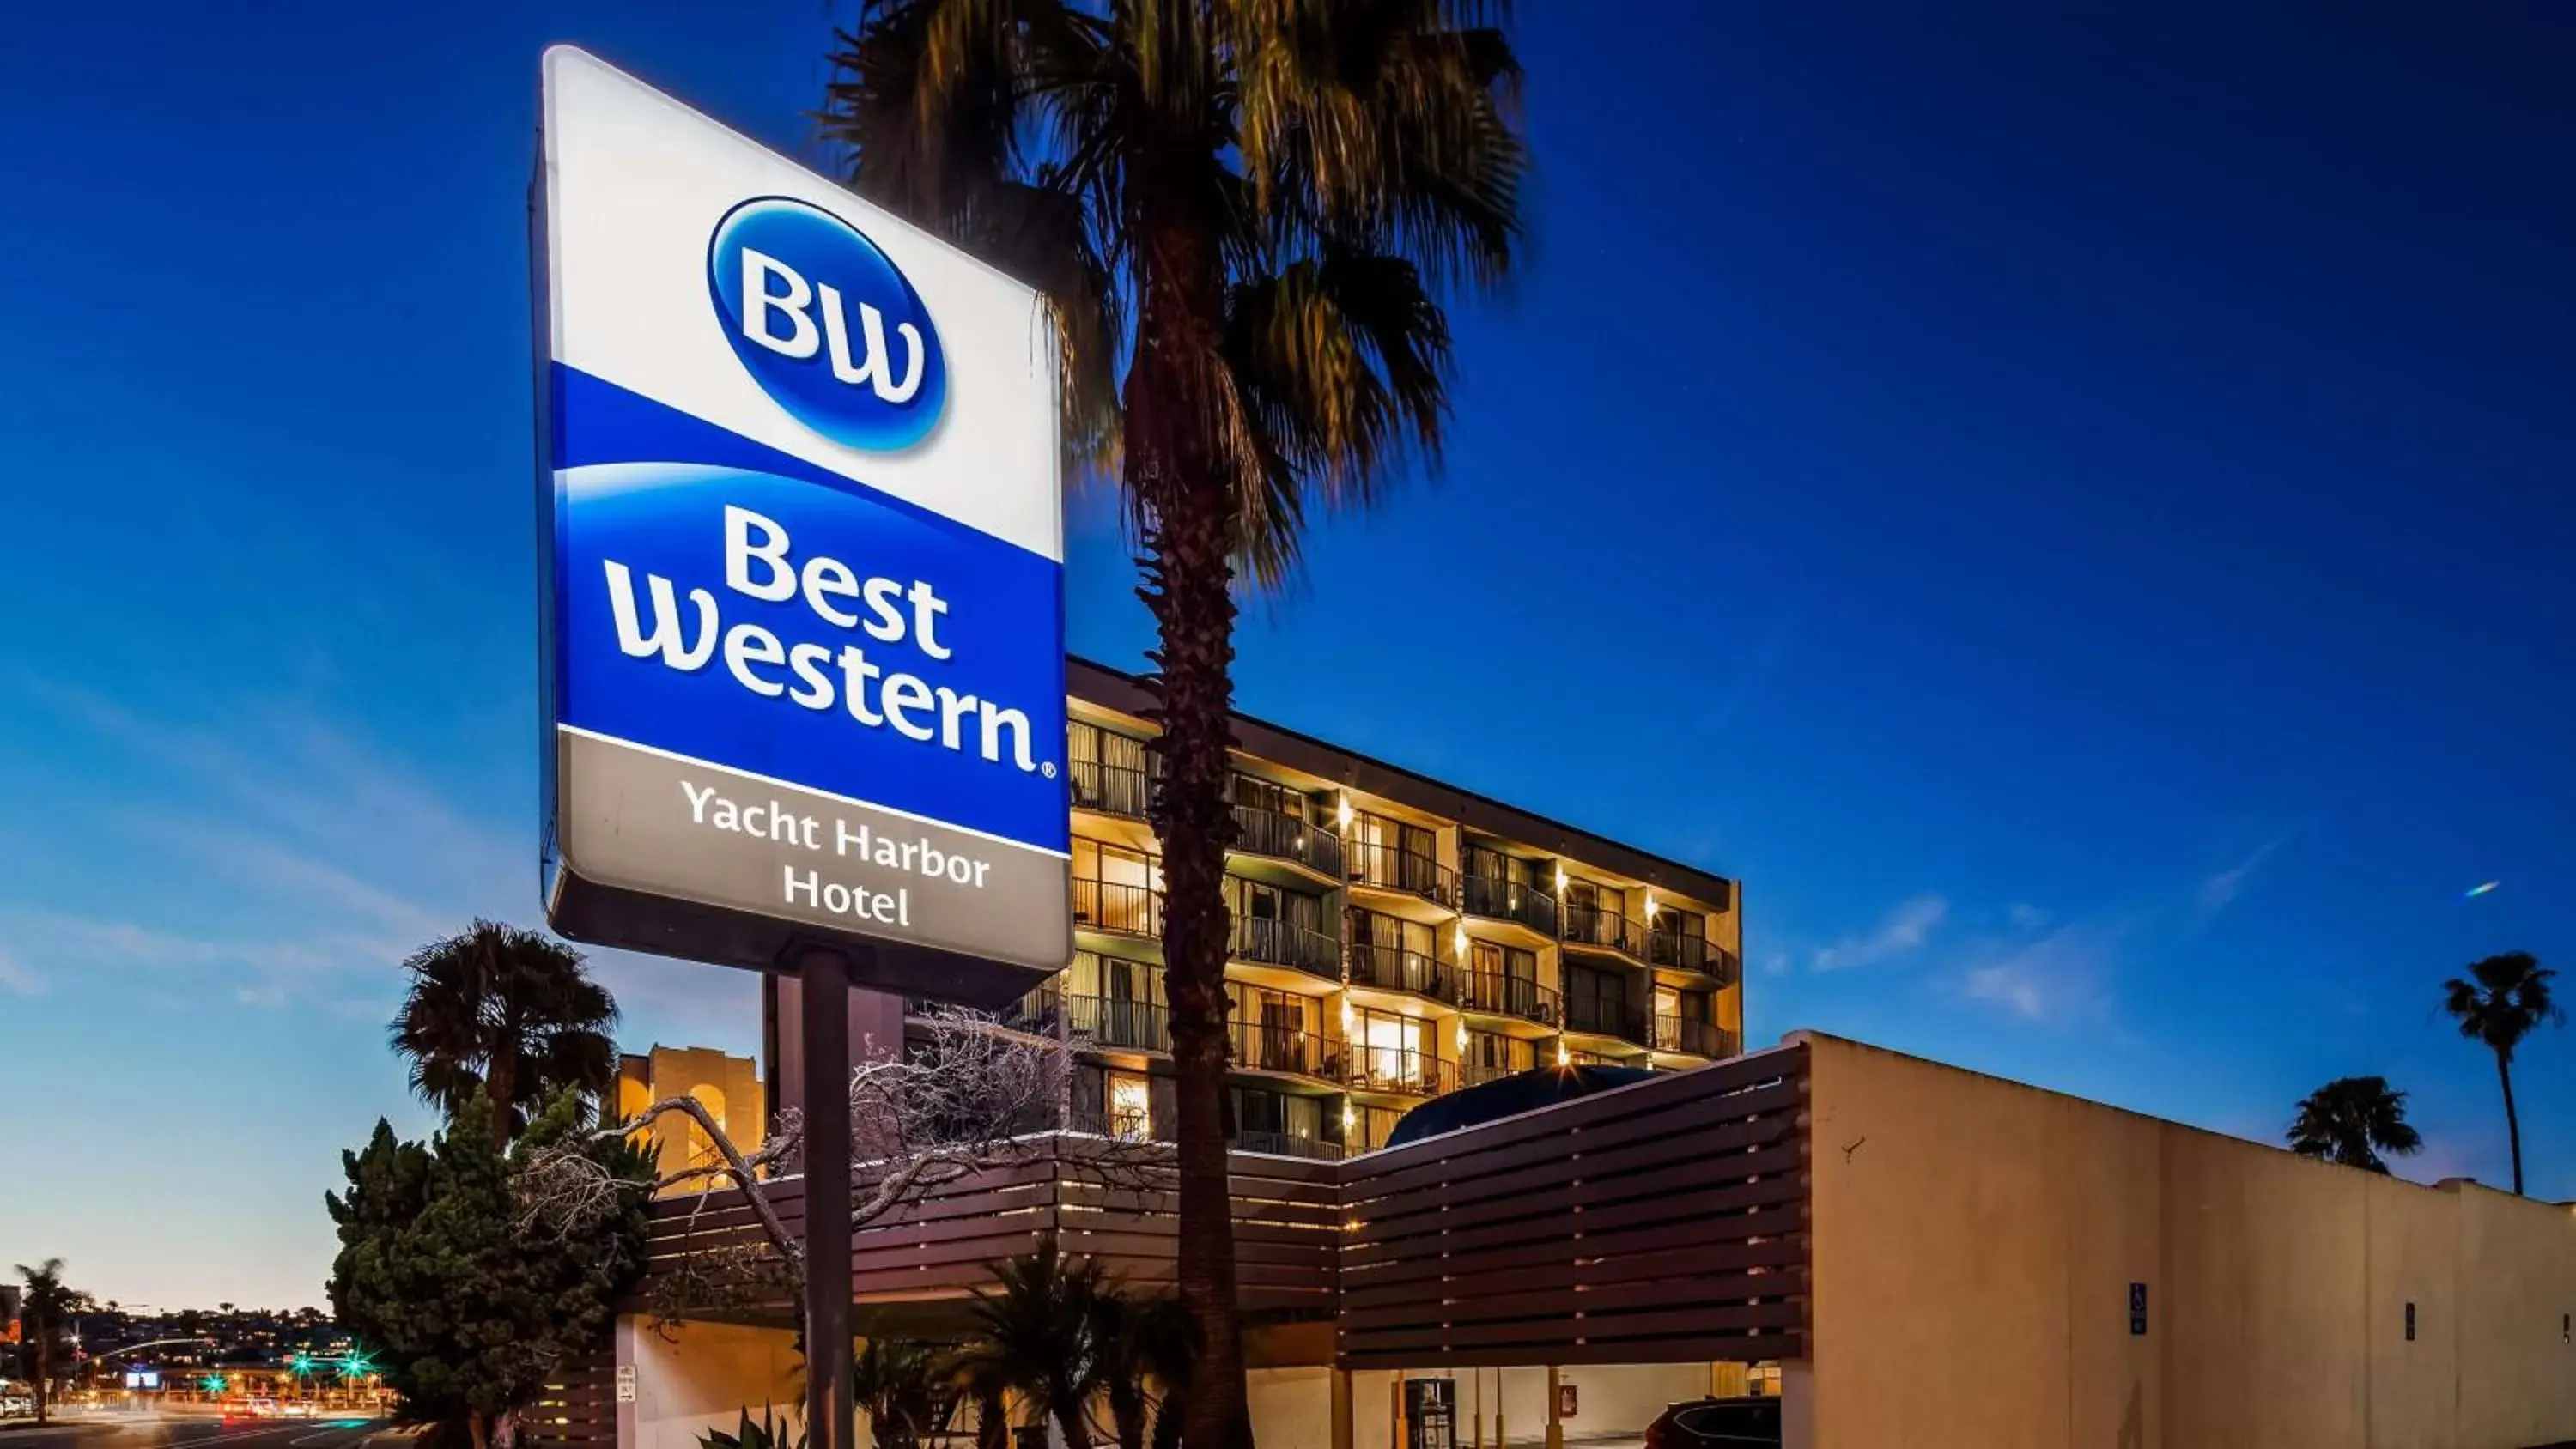 Property Building in Best Western Yacht Harbor Hotel